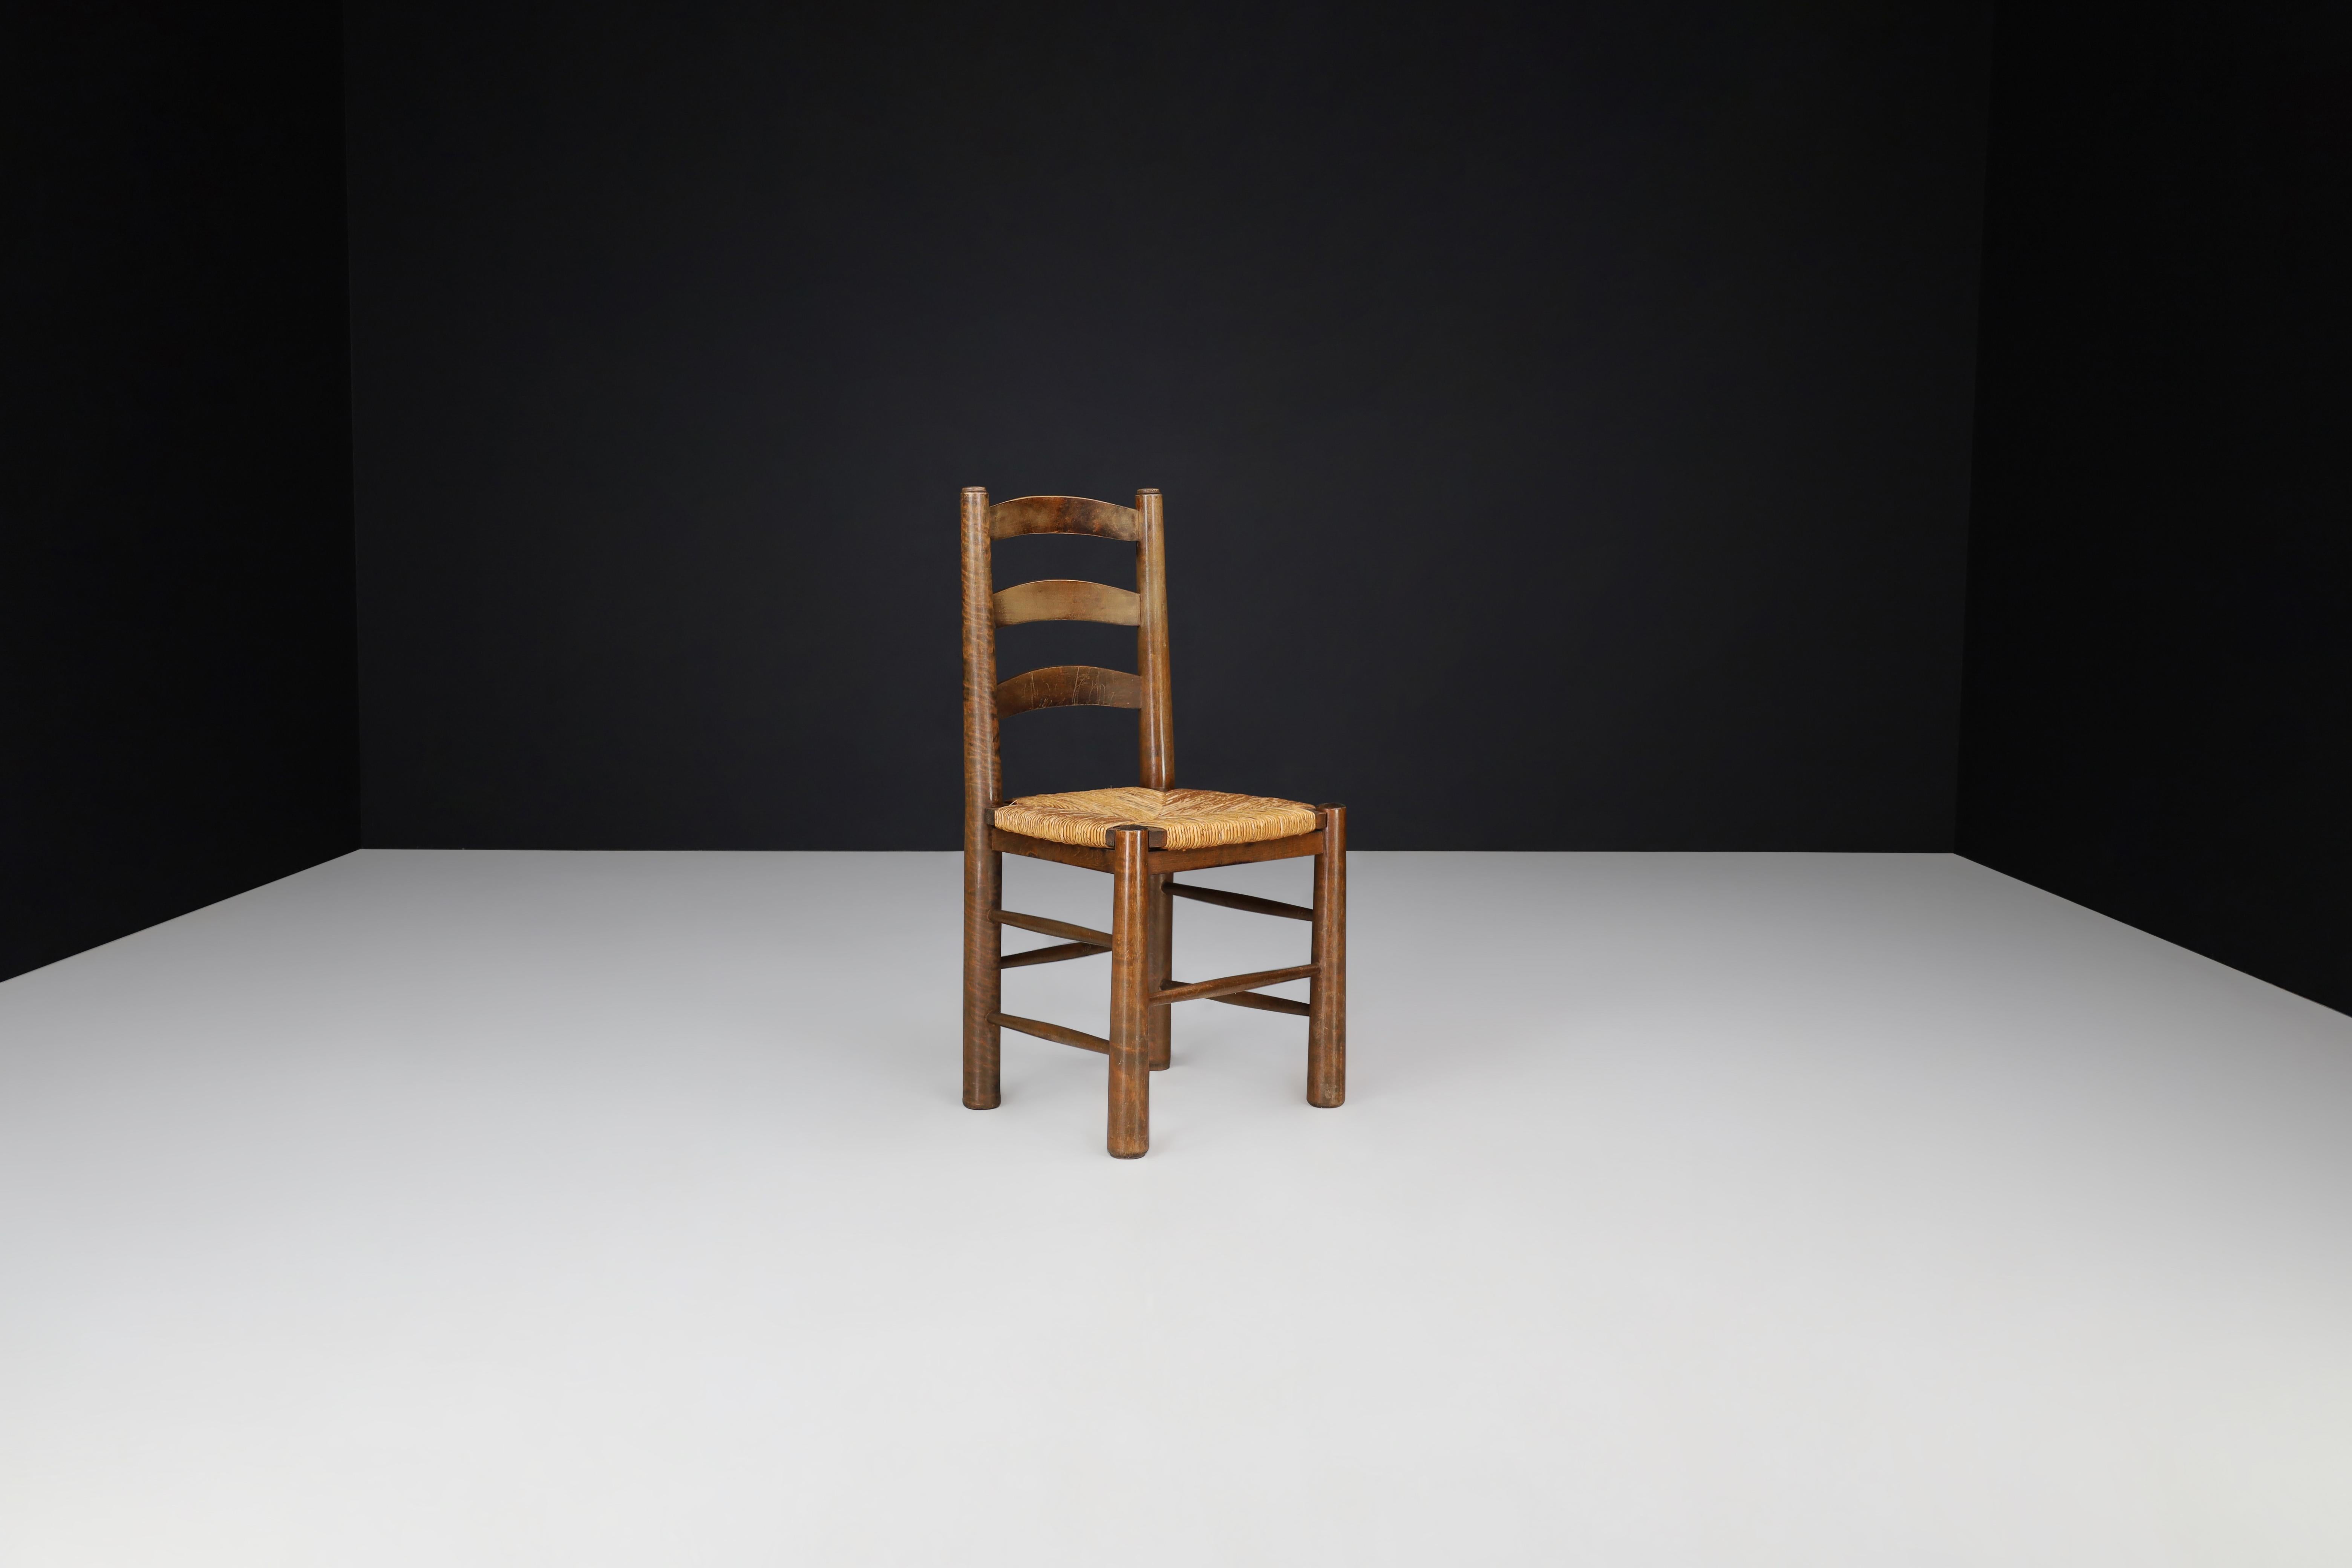 Georges Robert Chalet Chairs in Oak and Rush, France, 1950s For Sale 2